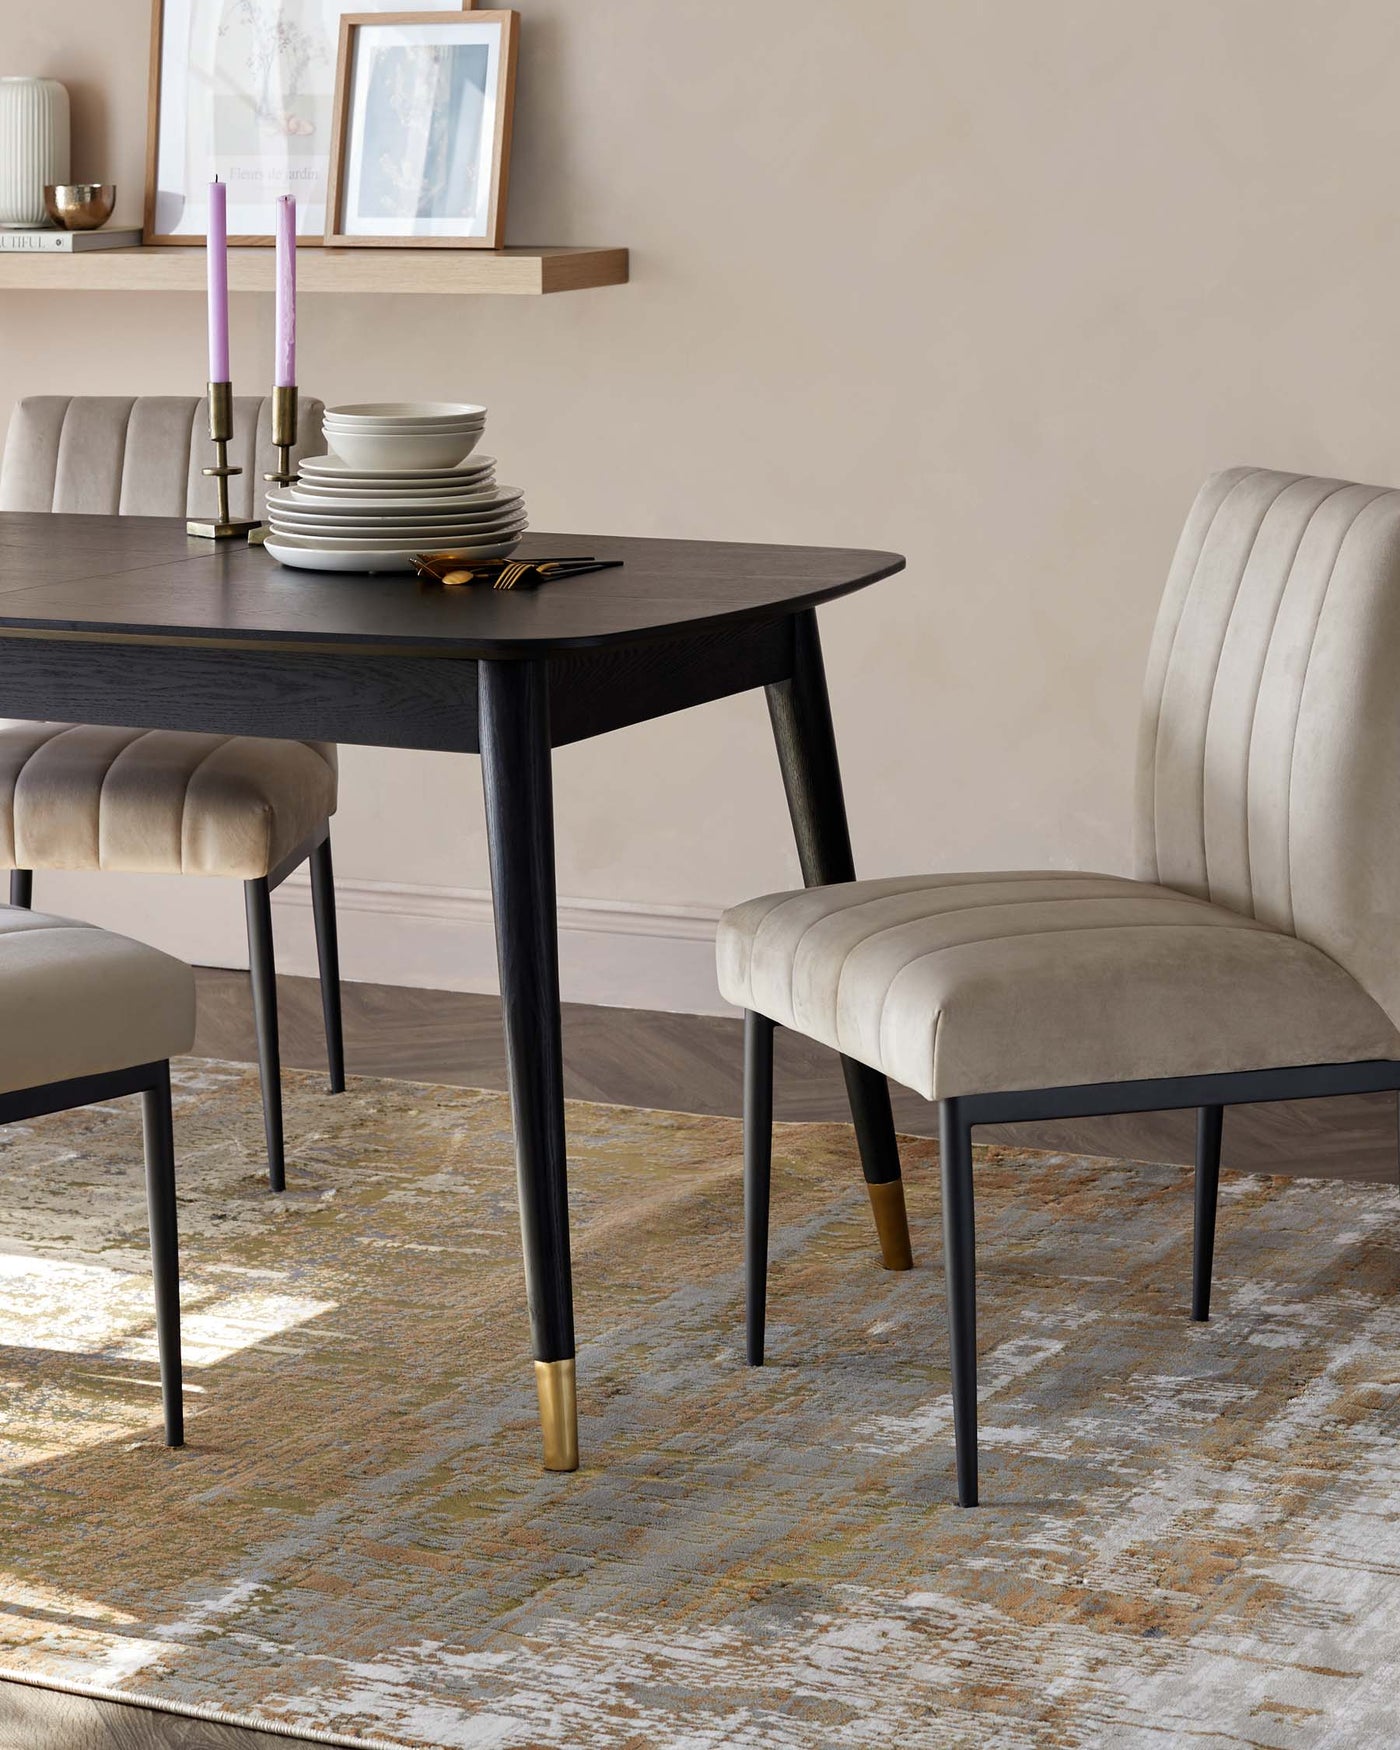 Elegant dining room setup featuring a sleek, black rectangular table with tapered legs finished with gold-coloured tips. Accompanied by three plush, velvet, beige dining chairs with subtly curved backs and black, slender legs, matching the table. The ensemble is positioned on top of a distressed, multi-coloured area rug, blending warm hues with a touch of cool tones.